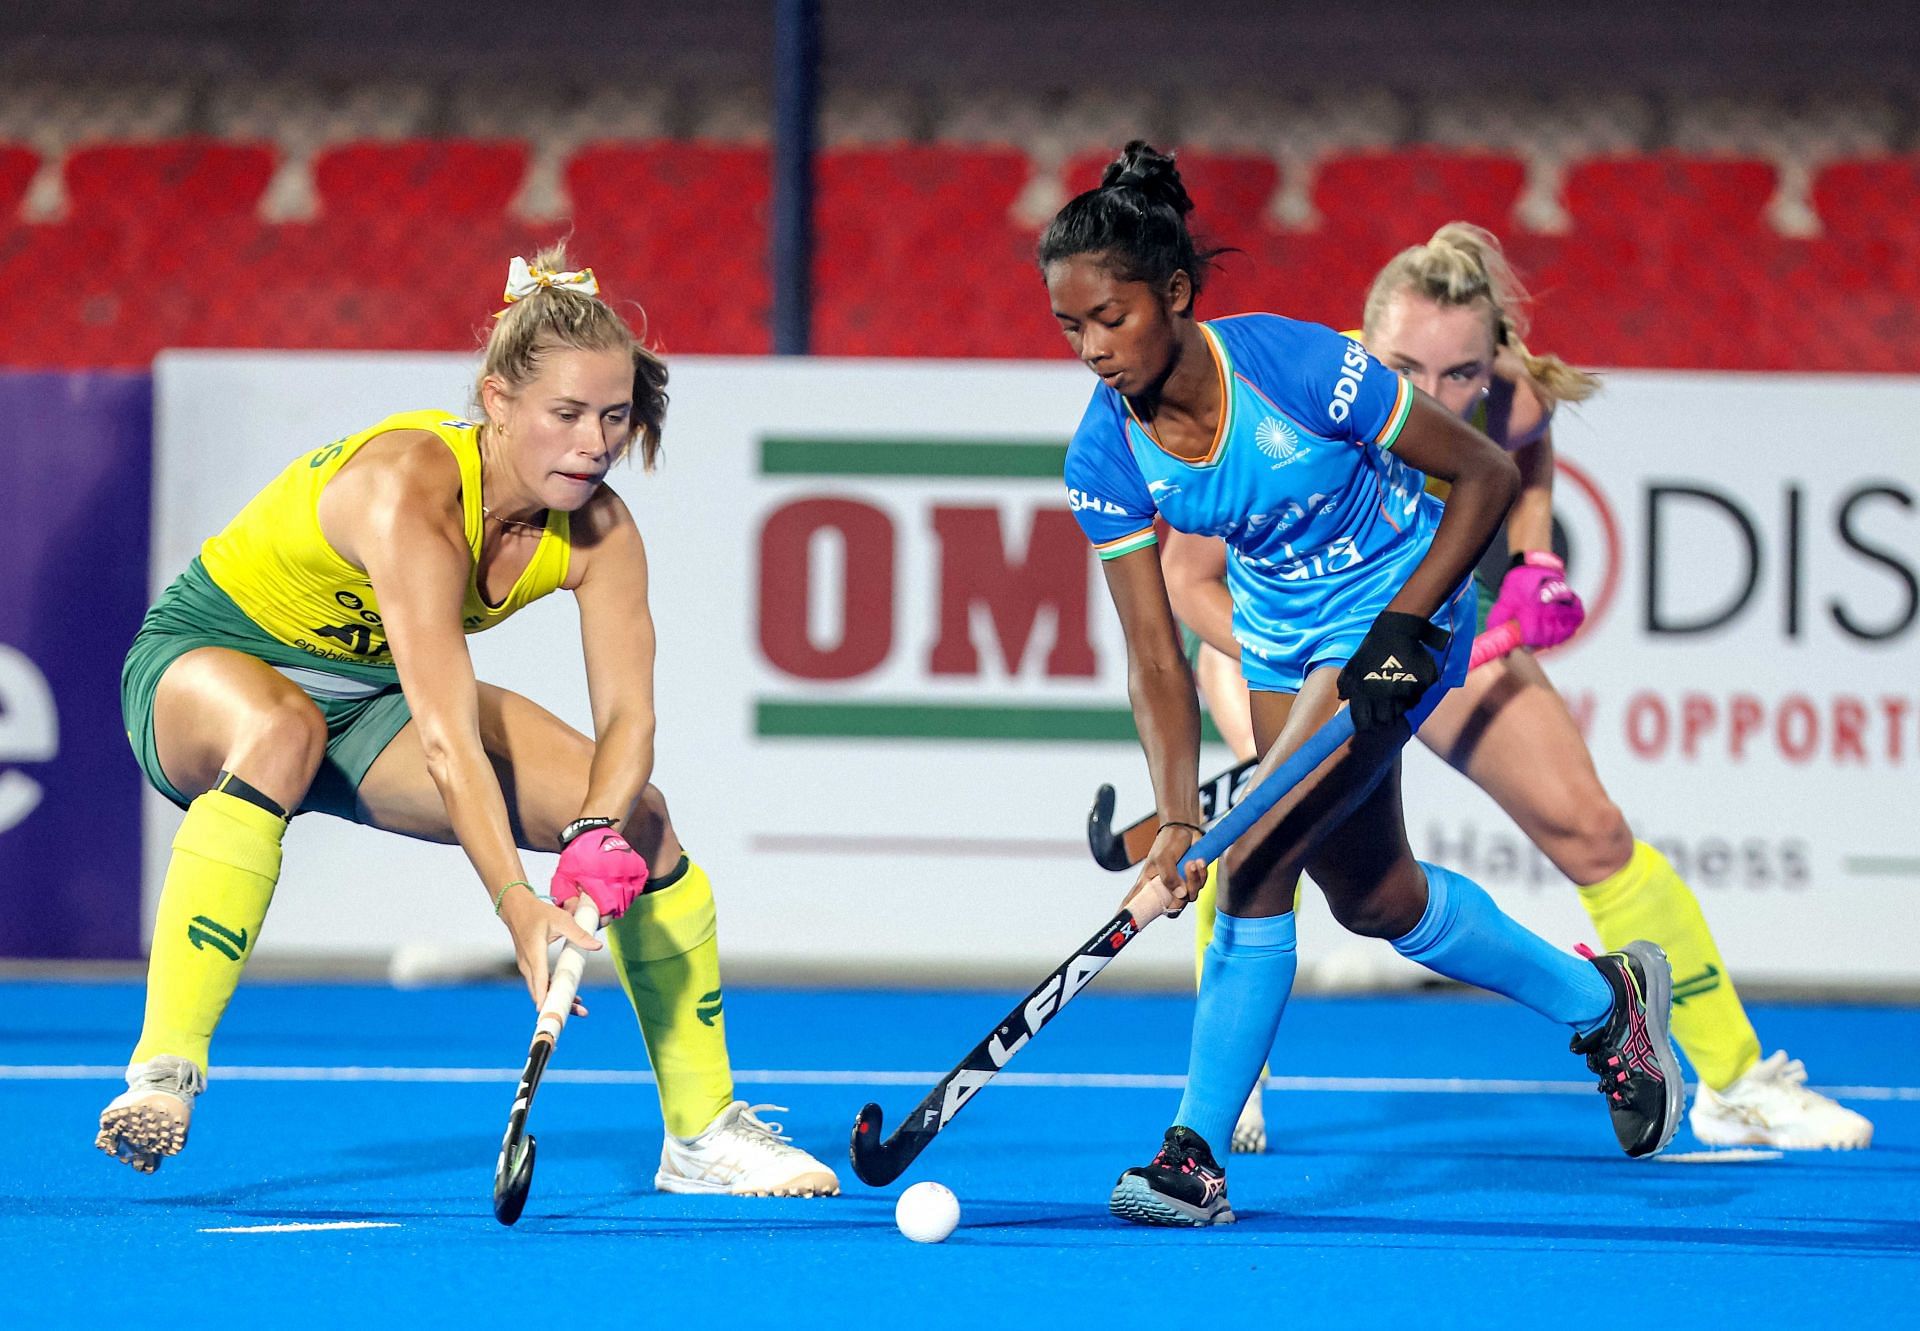 Indian team suffered another loss in the FIH Pro League, against Australia, on Wednesday